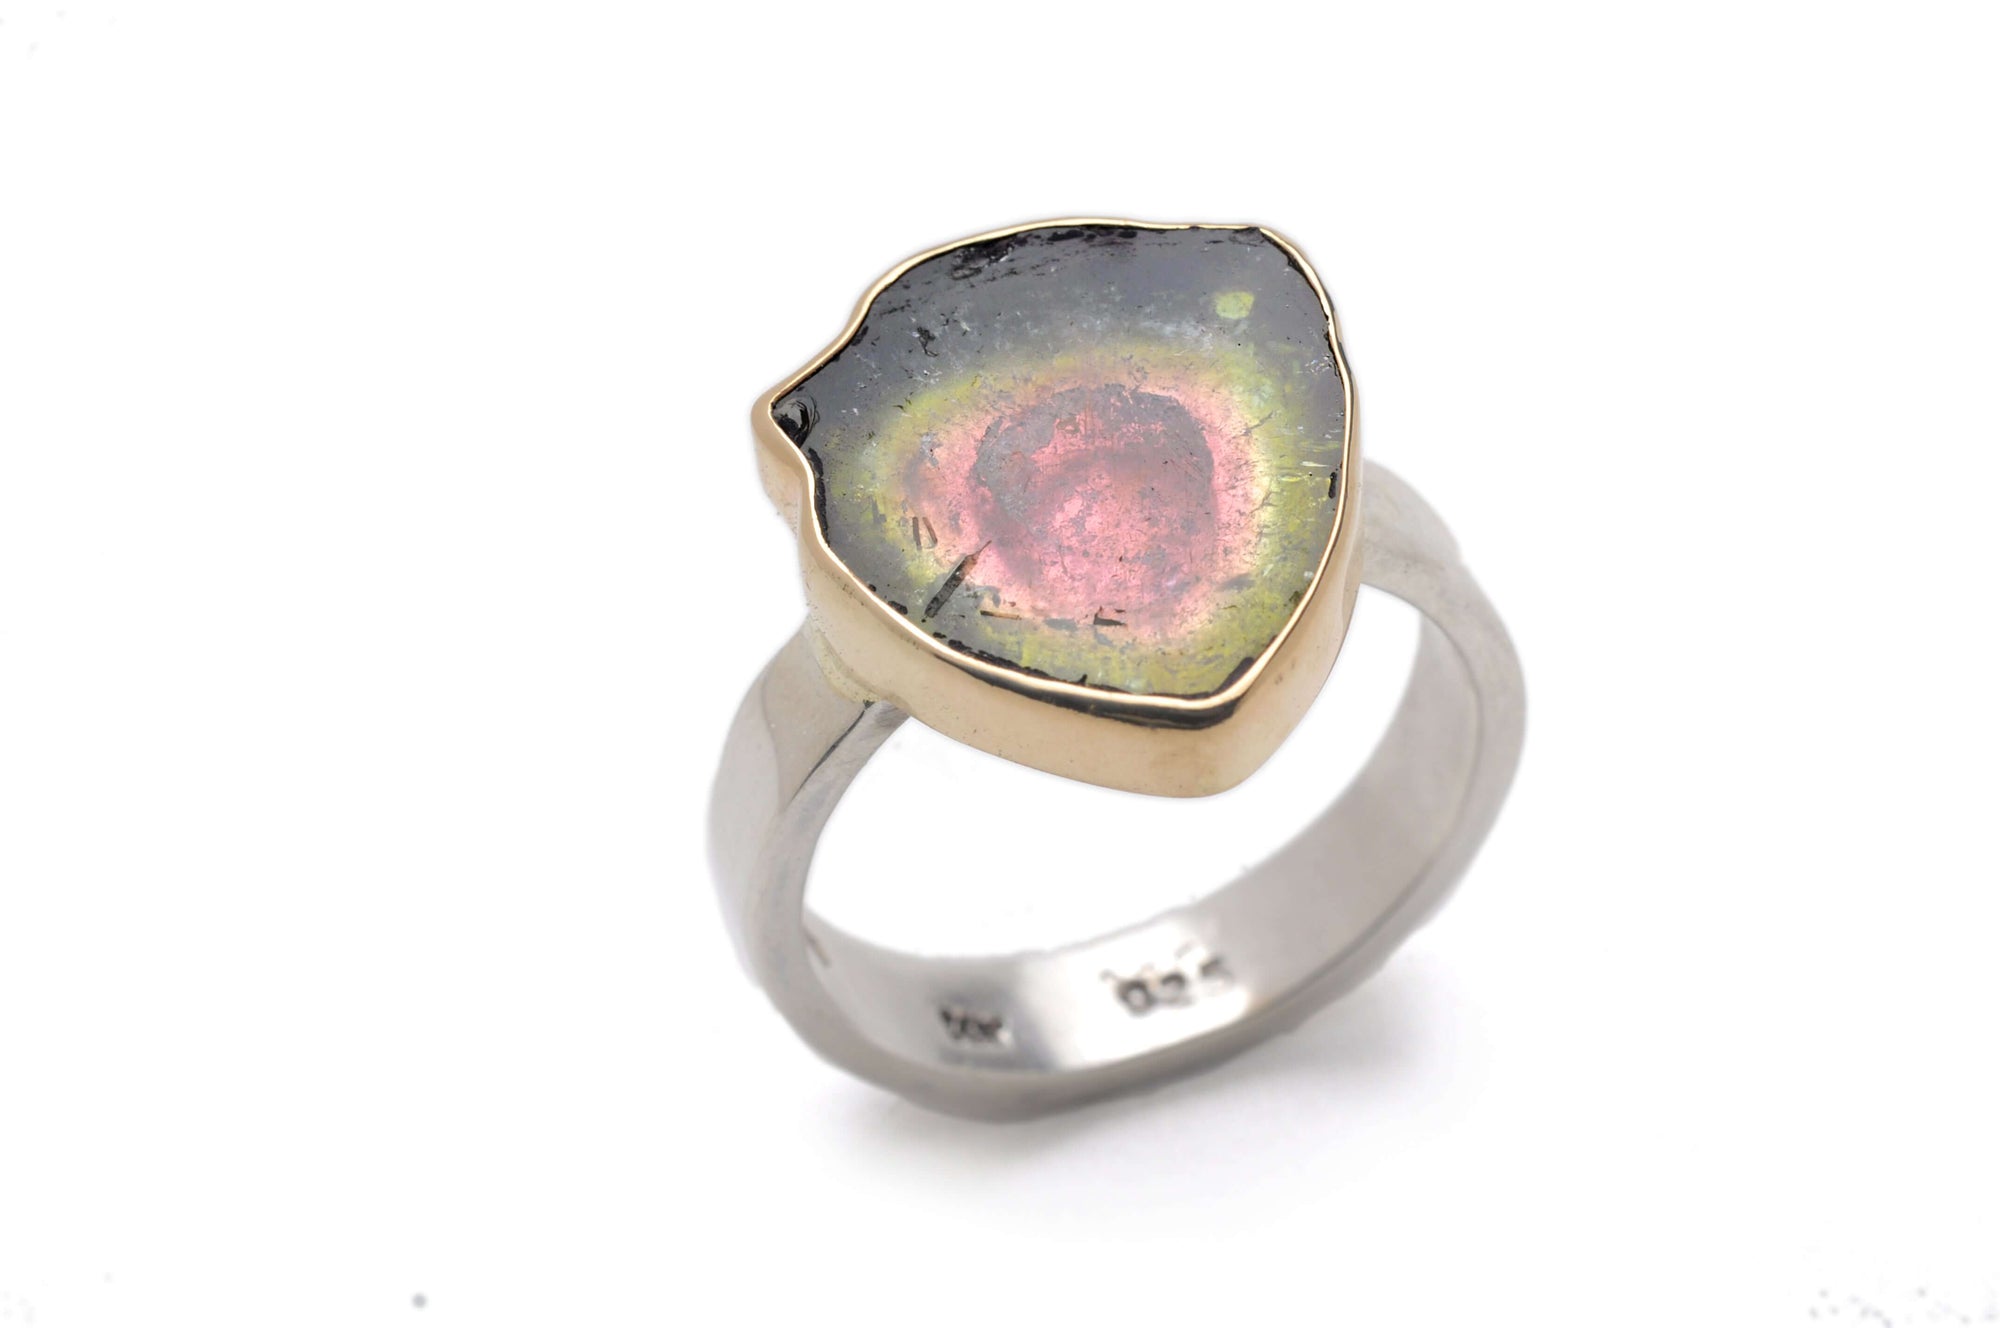 A sterling silver, 14k gold and genuine watermelon tourmaline ring